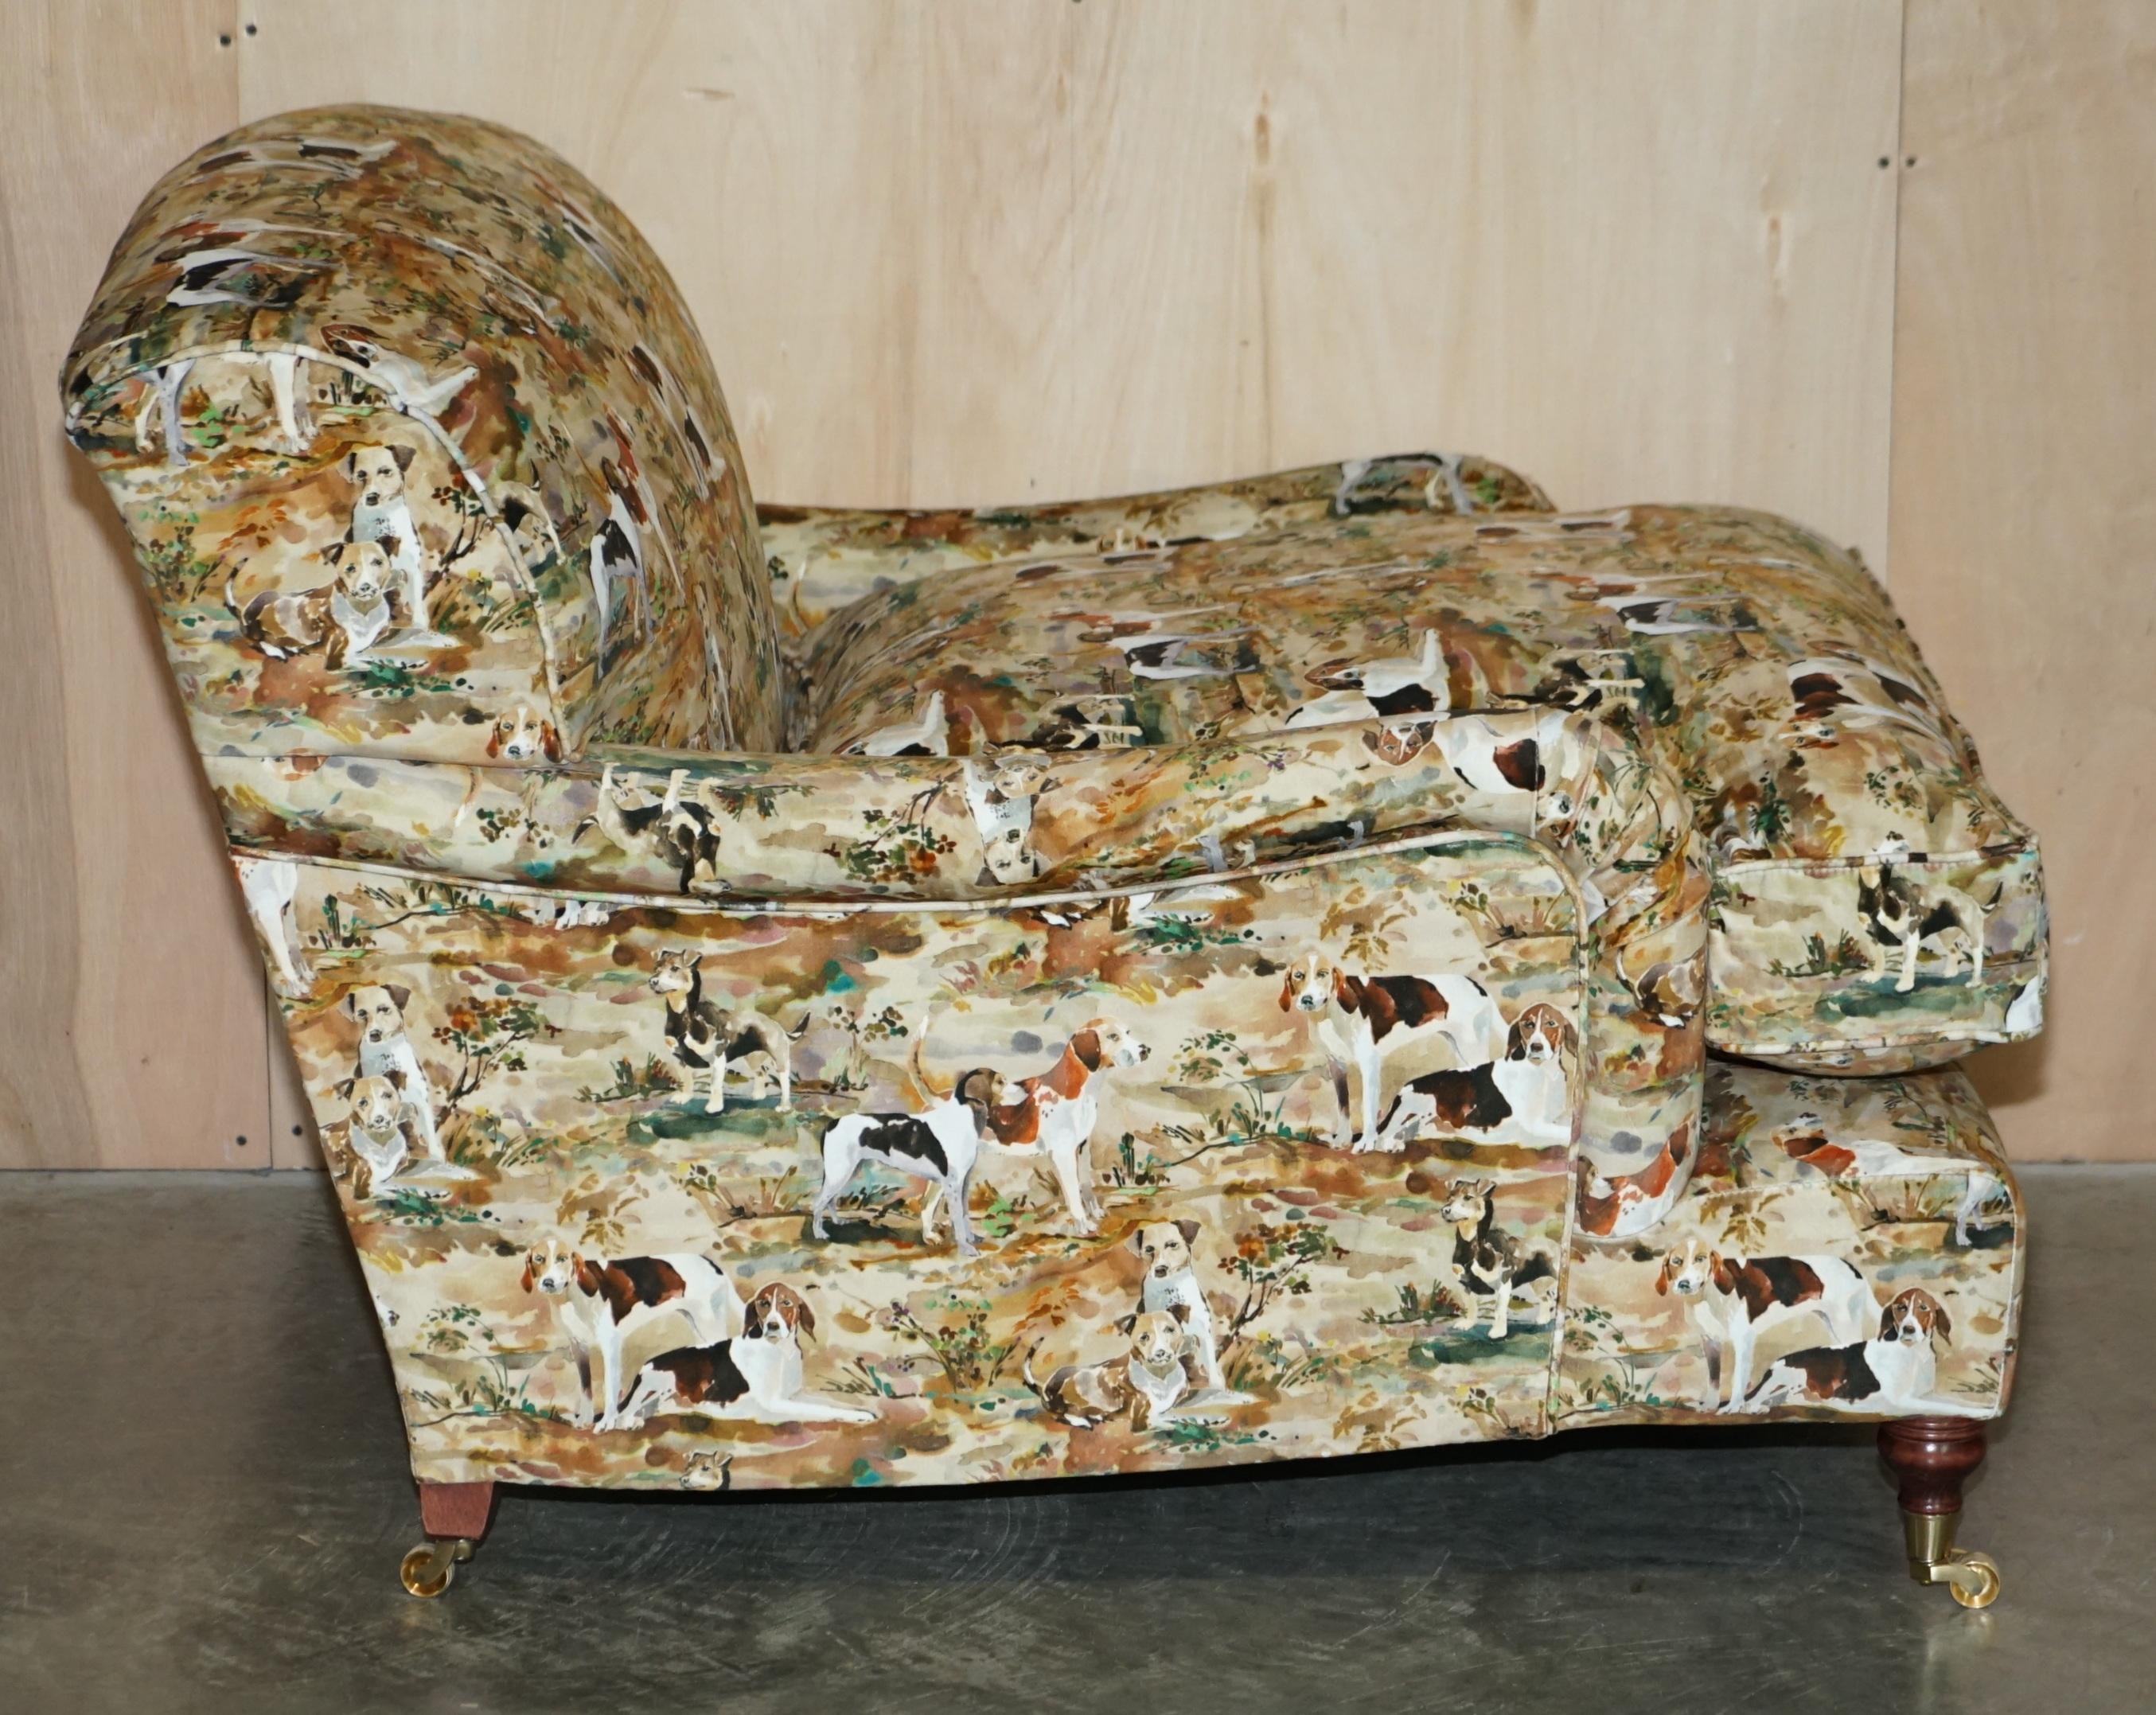 New Pair of Mulberry Custom Made Howard Love Seat Armchairs Hounds Silk Velvet For Sale 11